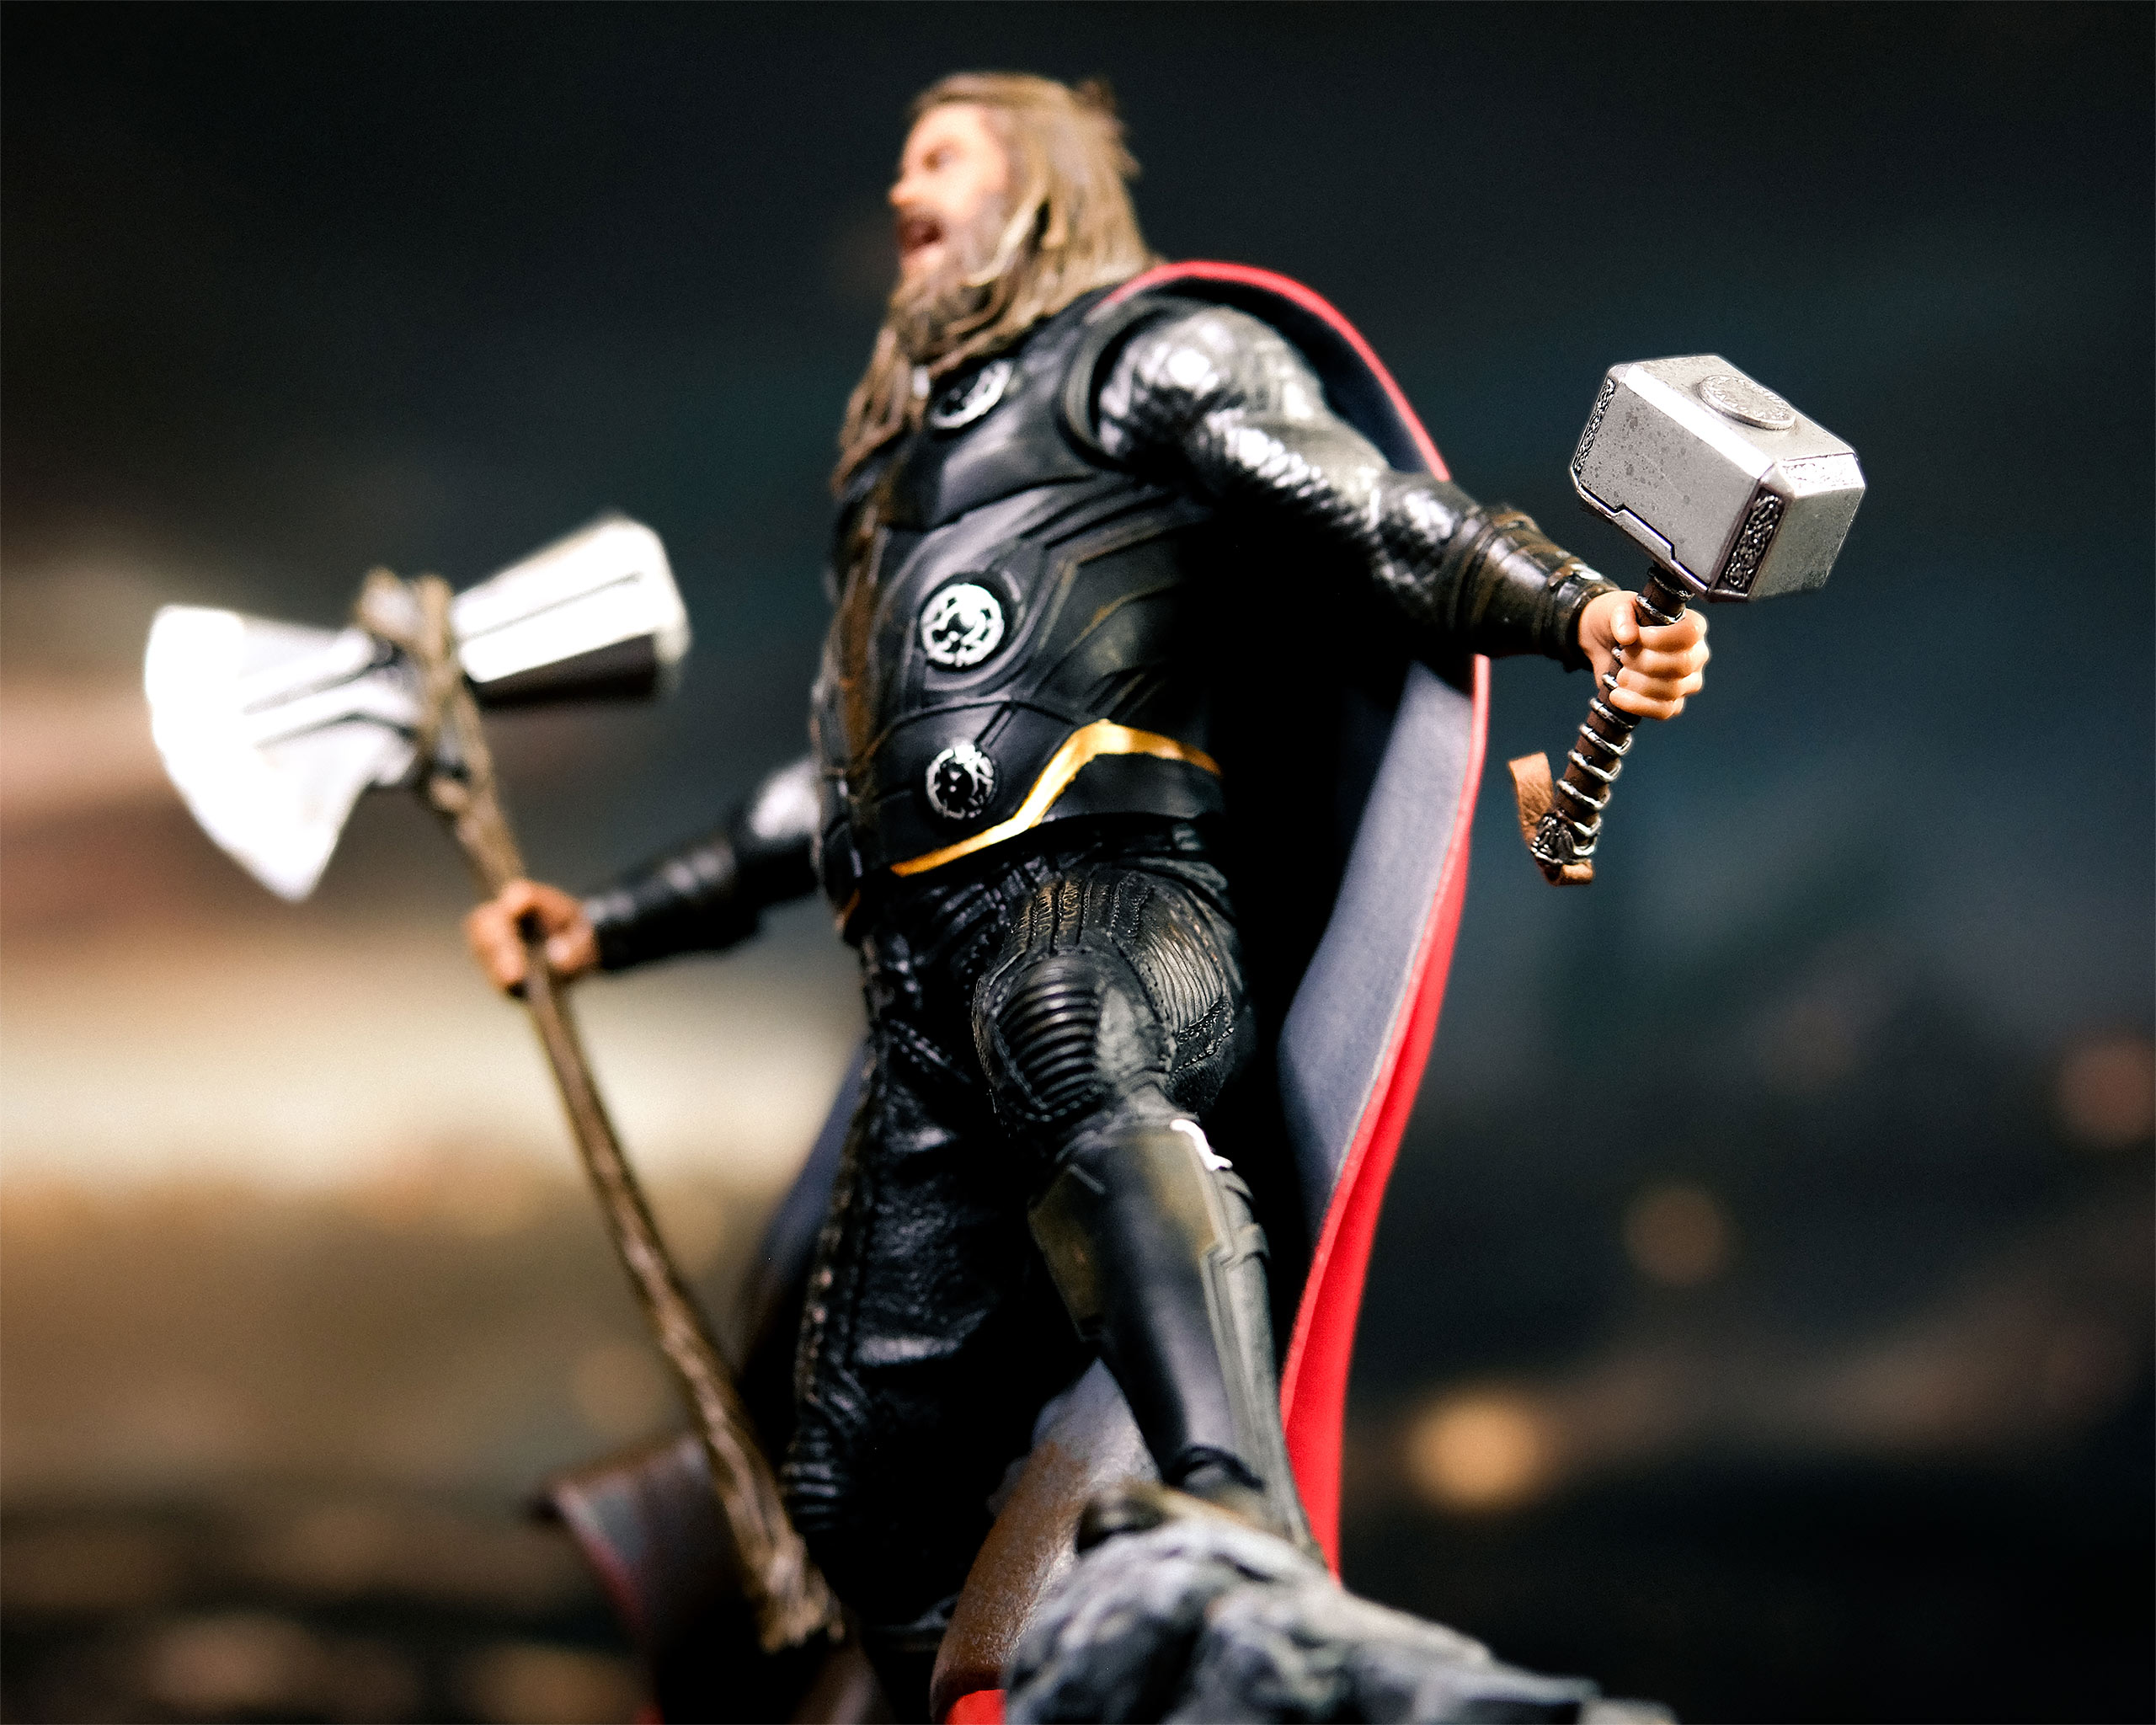 Thor BDS Art Scale Deluxe Statue